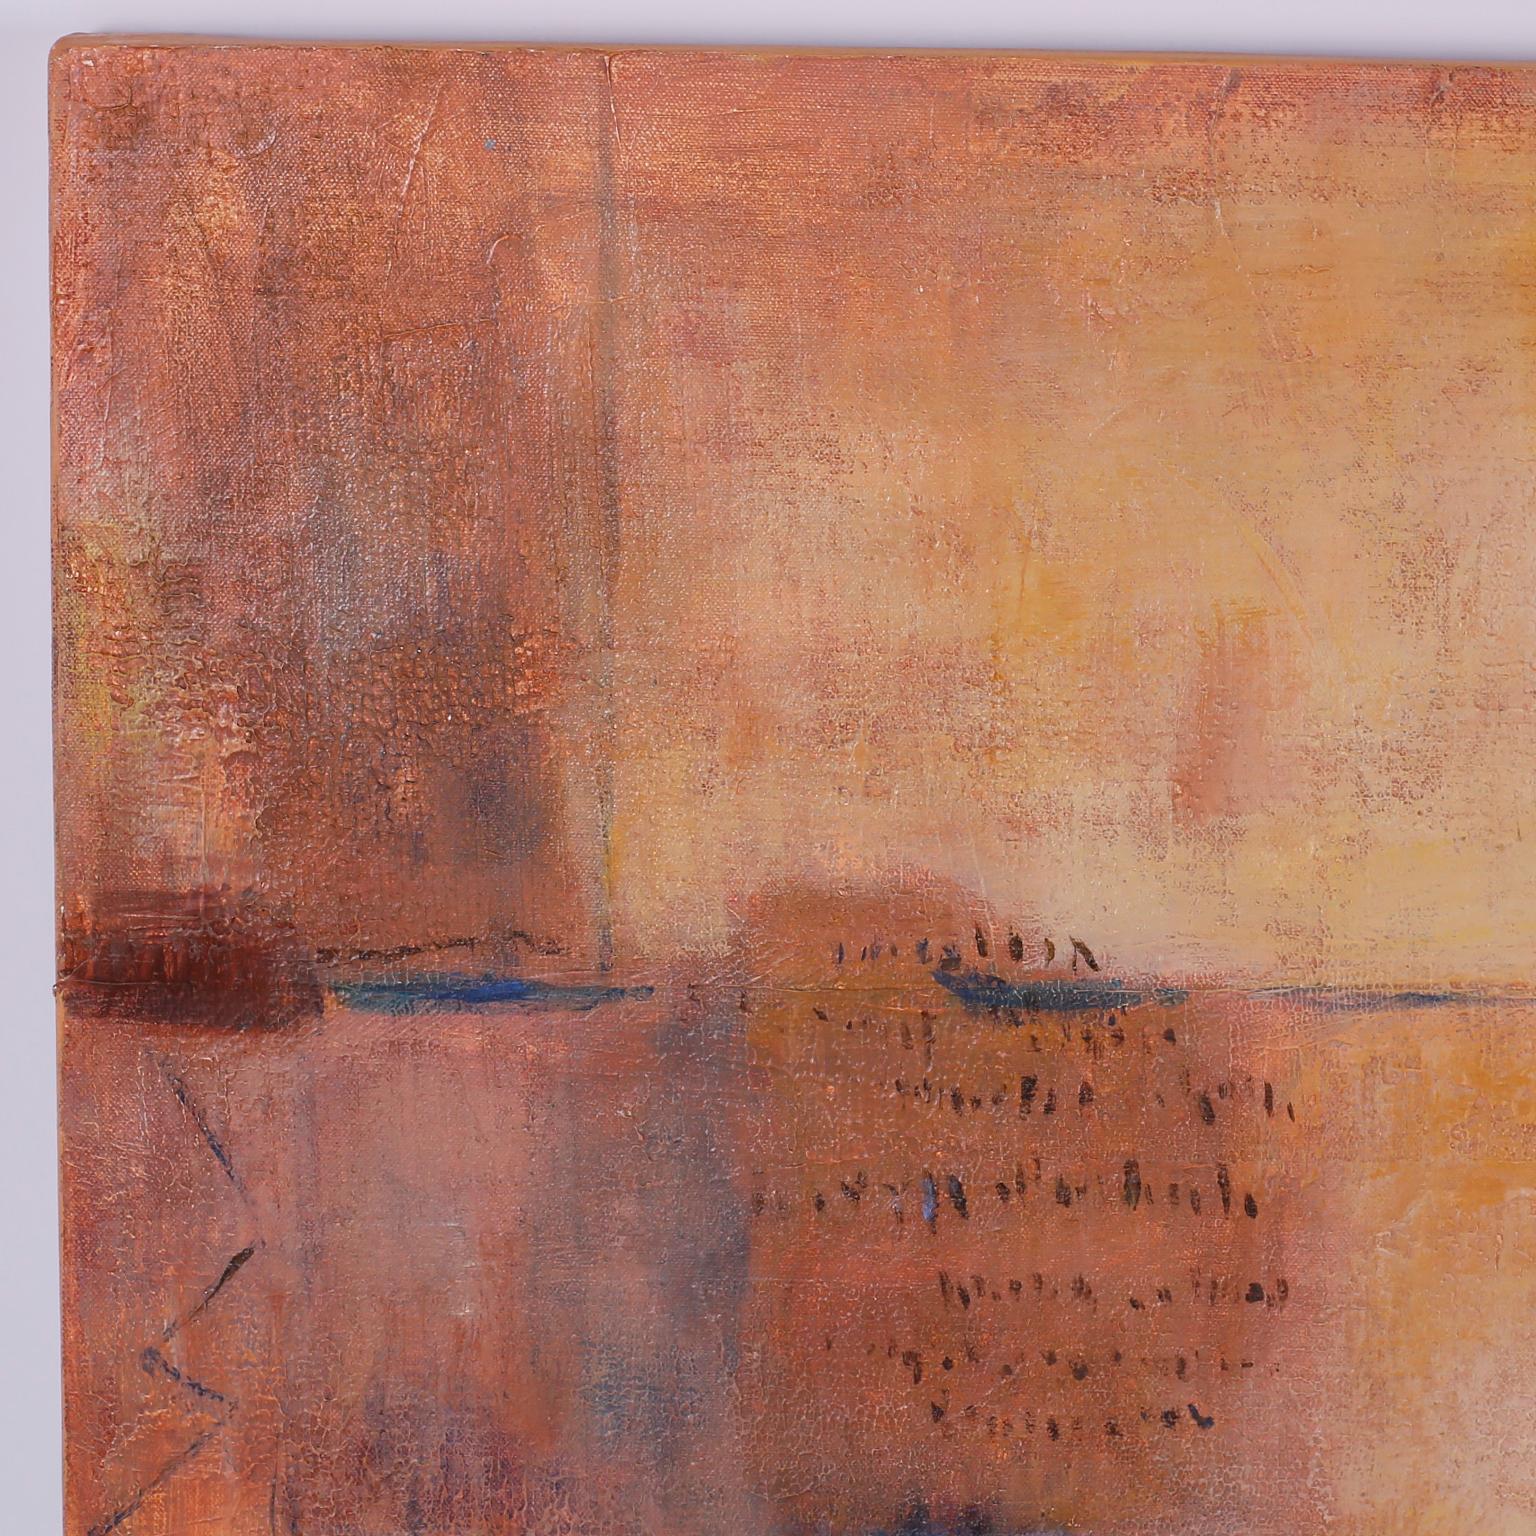 Evocative midcentury abstract acrylic painting on canvas with a dreamy warm palette and mysterious vague inscriptions.